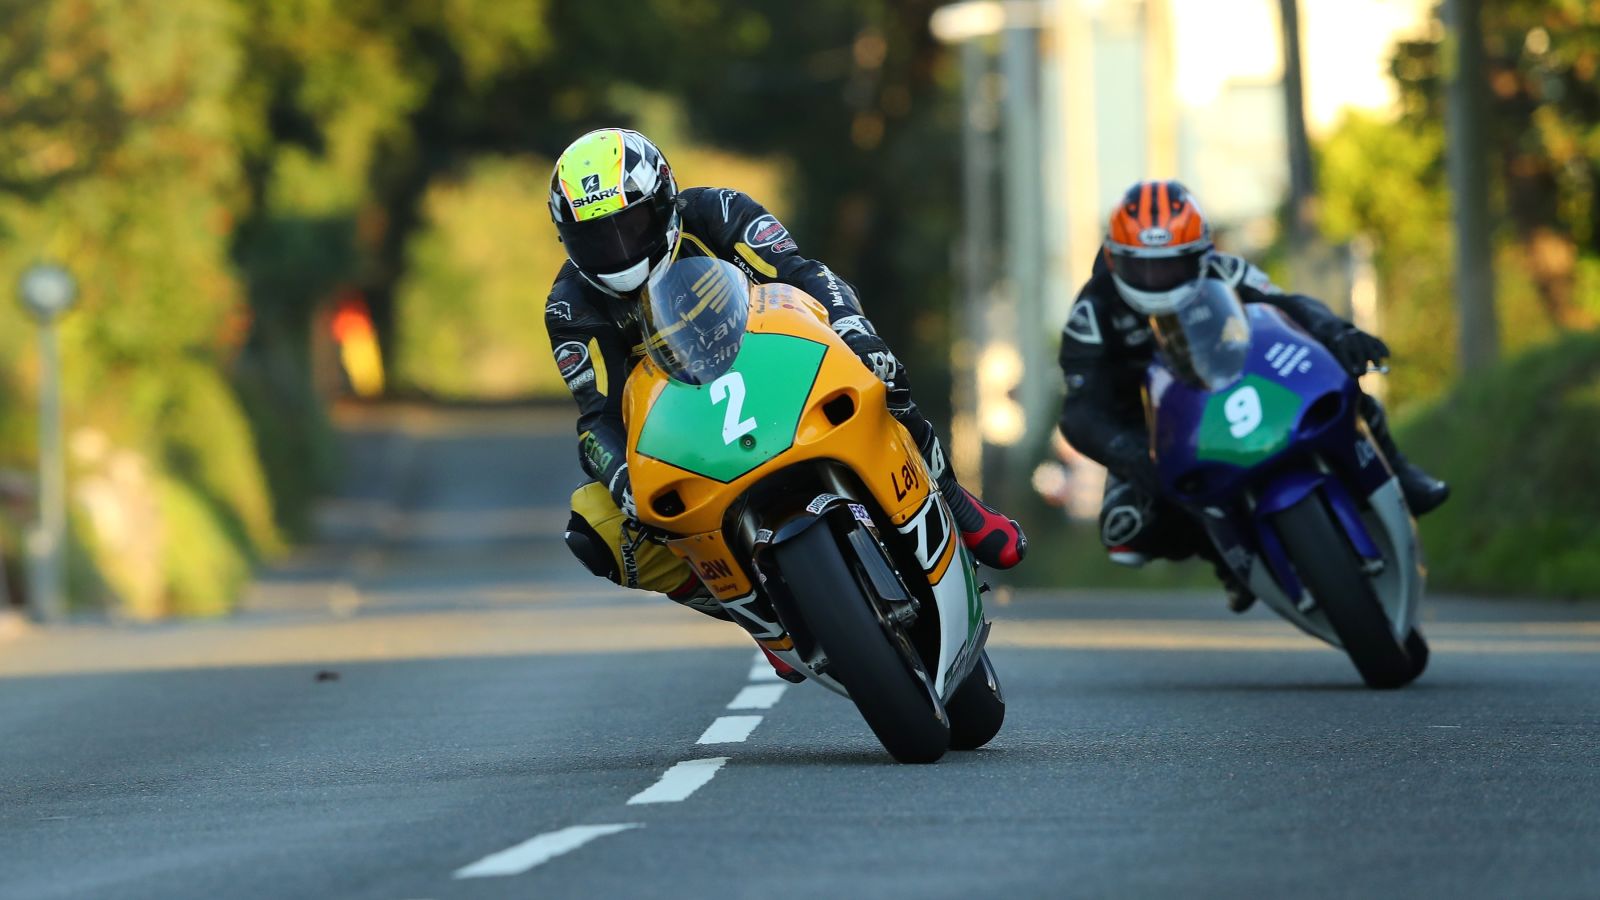 Racing returns to the Isle of Man with Manx Grand Prix after three